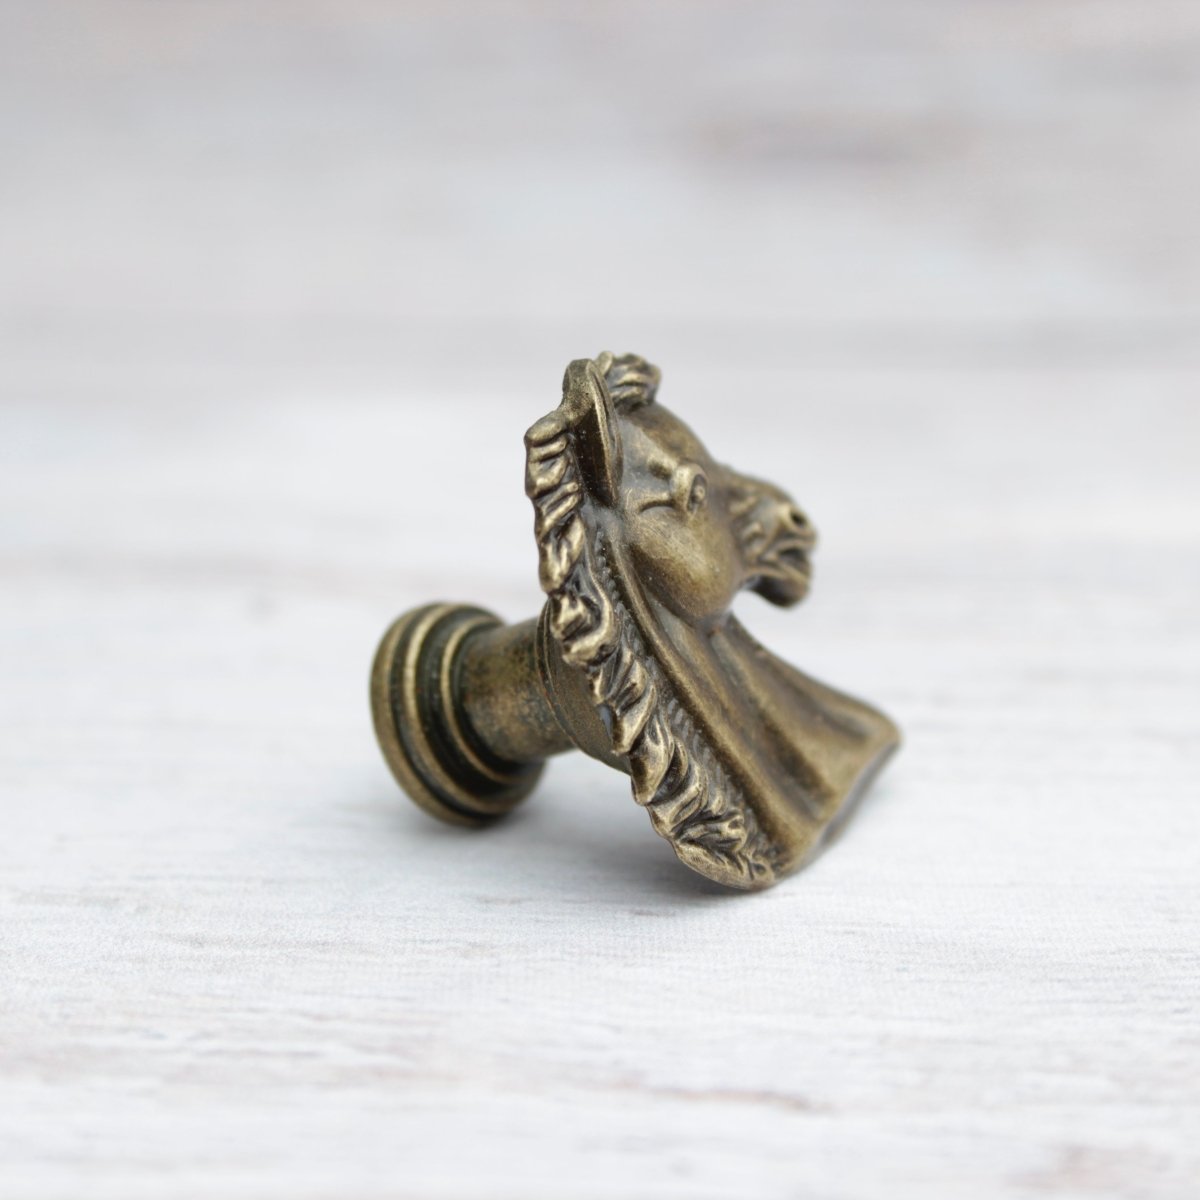 Horse Cabinet Knob in Antique Brass or Silver - DaRosa Creations